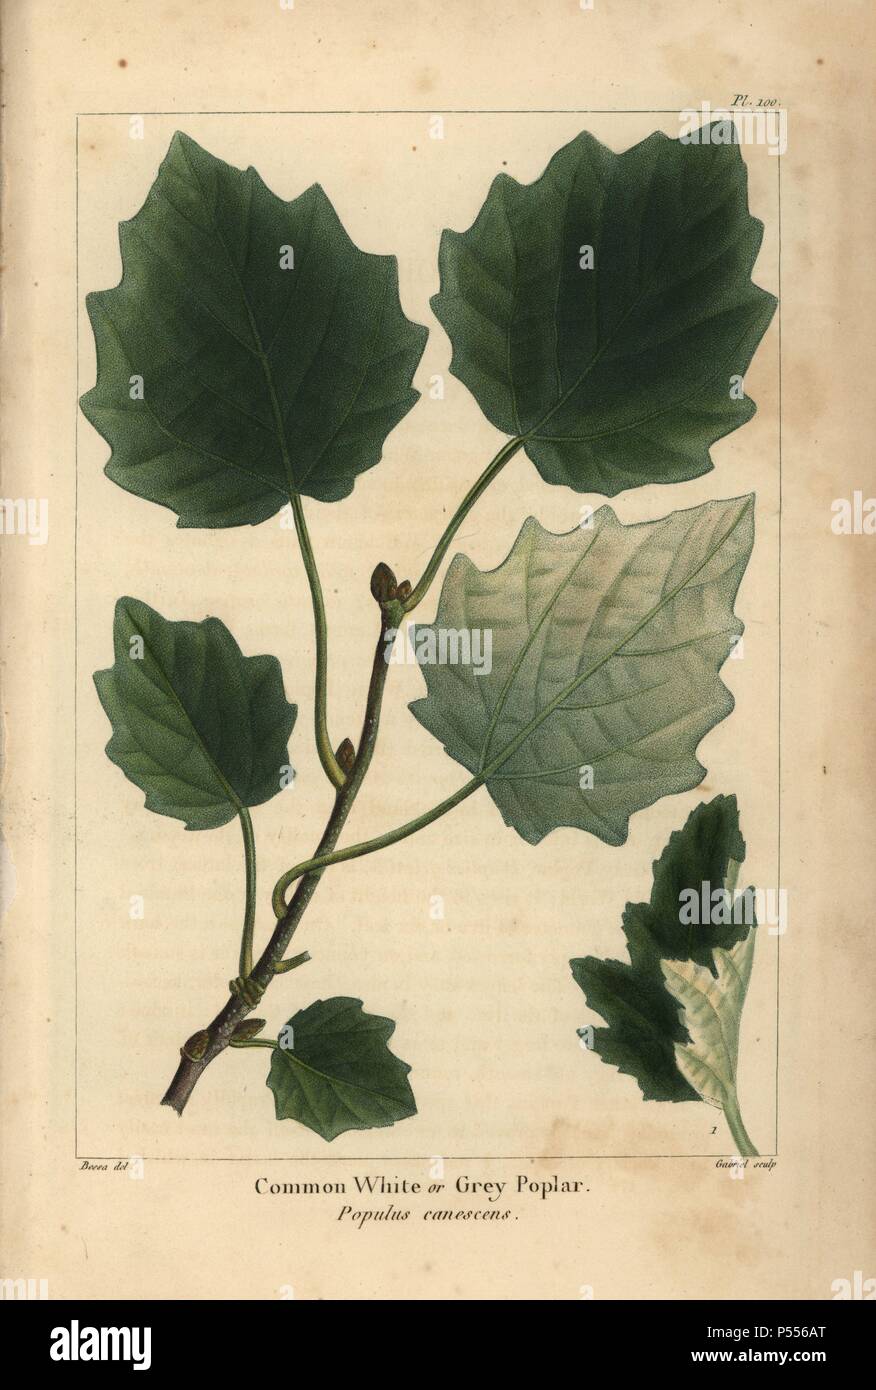 Leaf, branch and sprout of the Common white or grey poplar, Populus canescens. Handcolored stipple engraving from a botanical illustration by Pancrace Bessa, engraved on copper by Gabriel, from Francois Andre Michaux's 'North American Sylva,' Philadelphia, 1857. French botanist Michaux (1770-1855) explored America and Canada in 1785 cataloging its native trees. Stock Photo